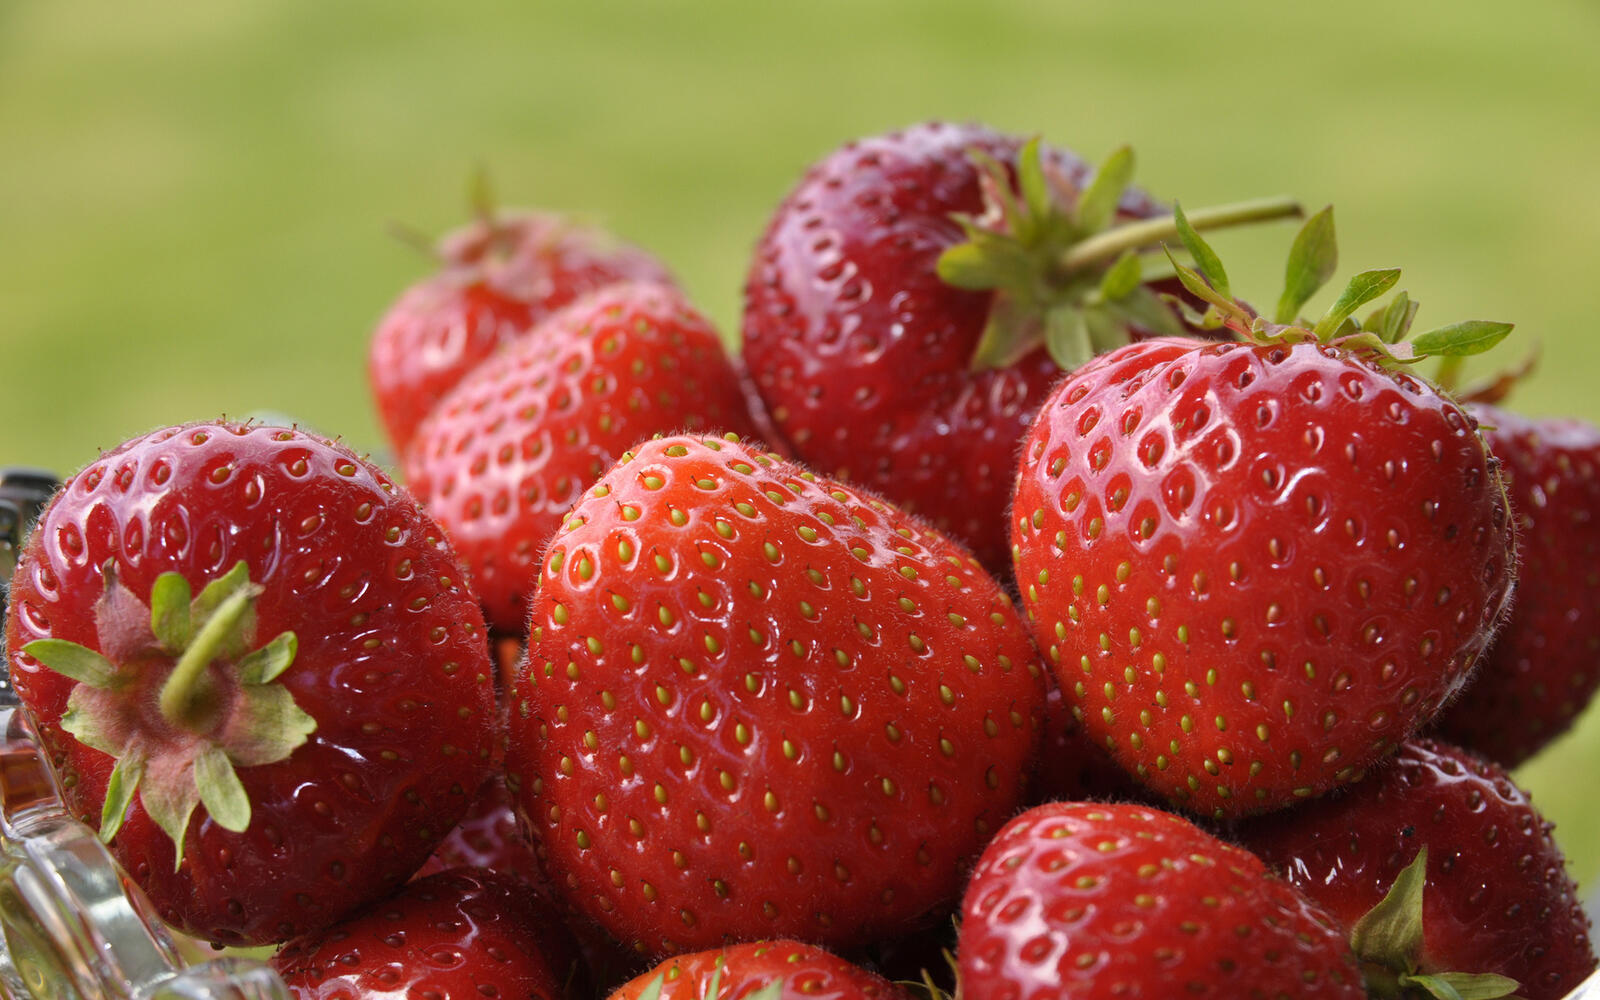 Wallpapers strawberry berry ripe on the desktop